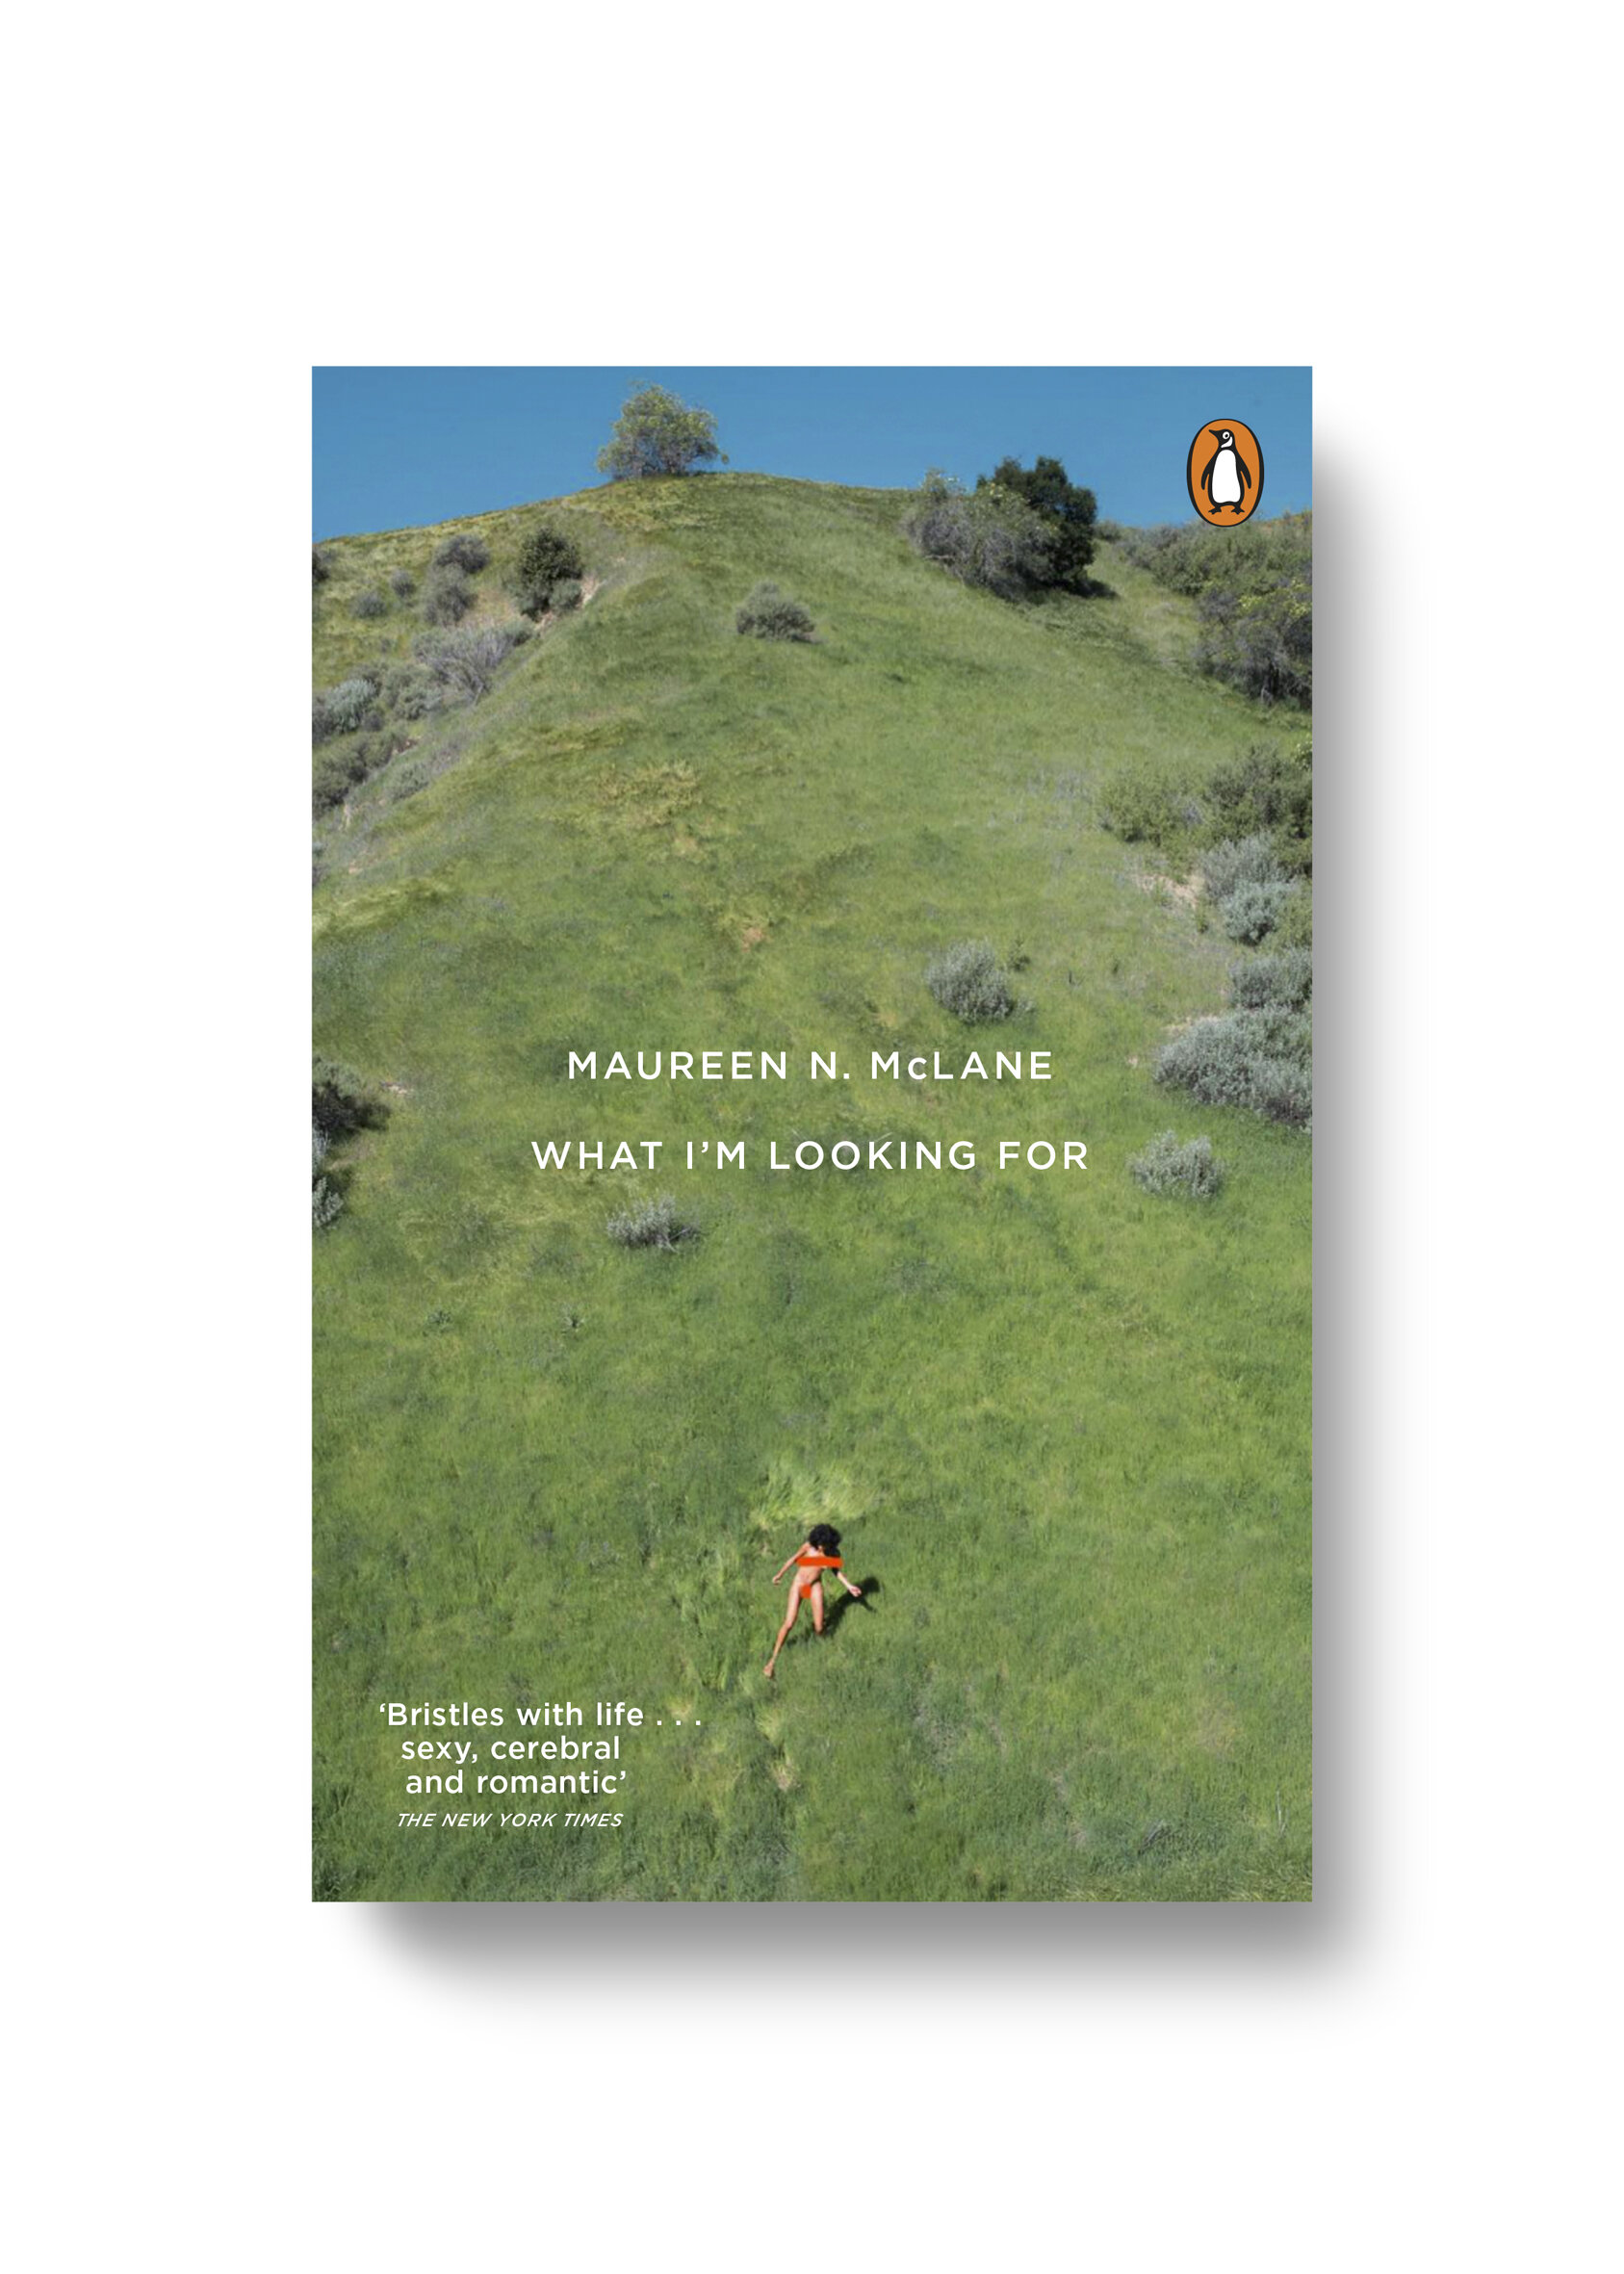  What I’m Looking For Maureen N. McLane – Cover Photograph: Jimmy Marble Design: Jim Stoddart 